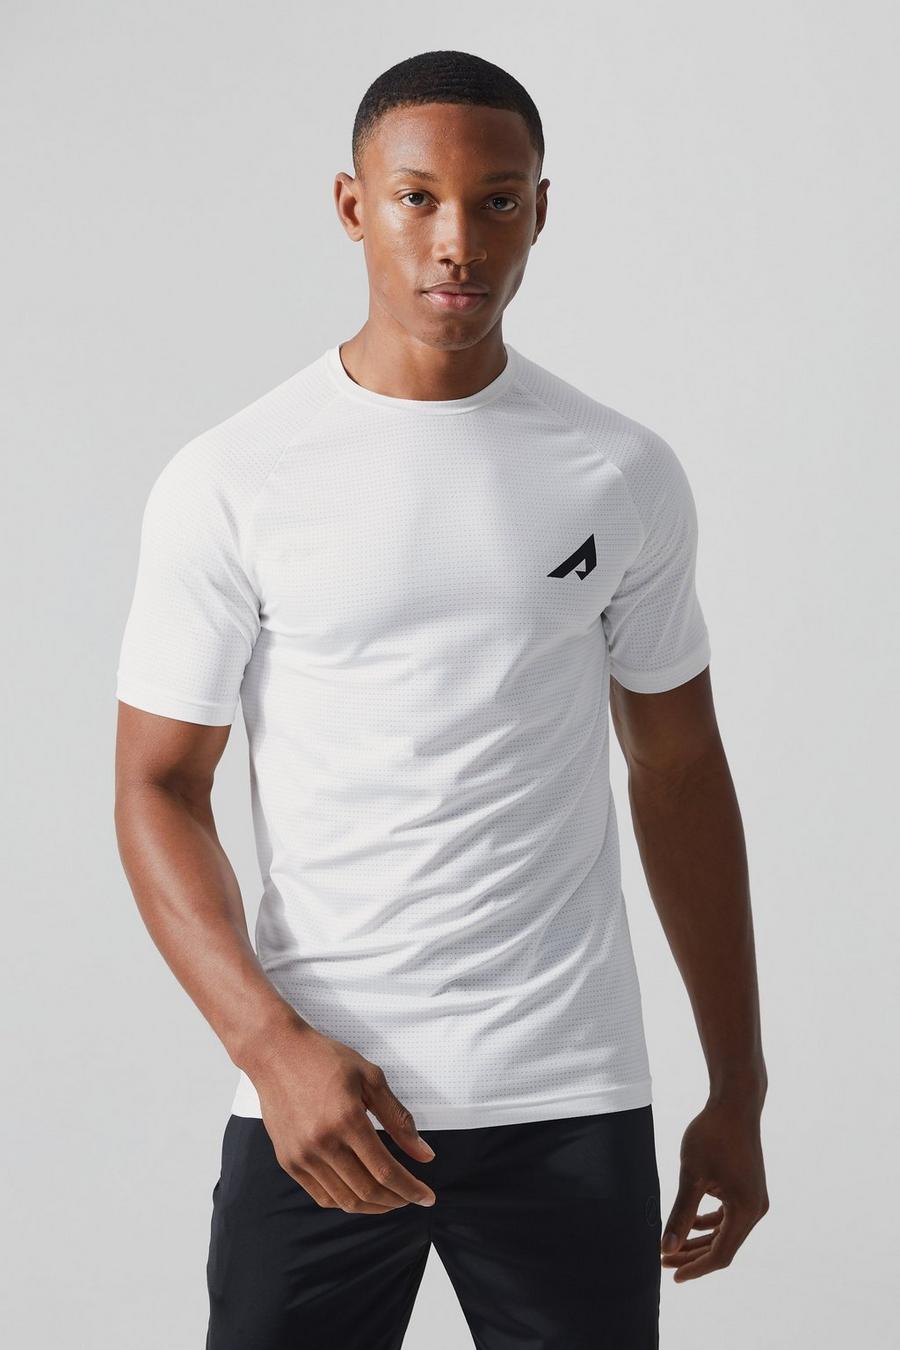 White Active Mesh Muscle Fit Performance T-Shirt